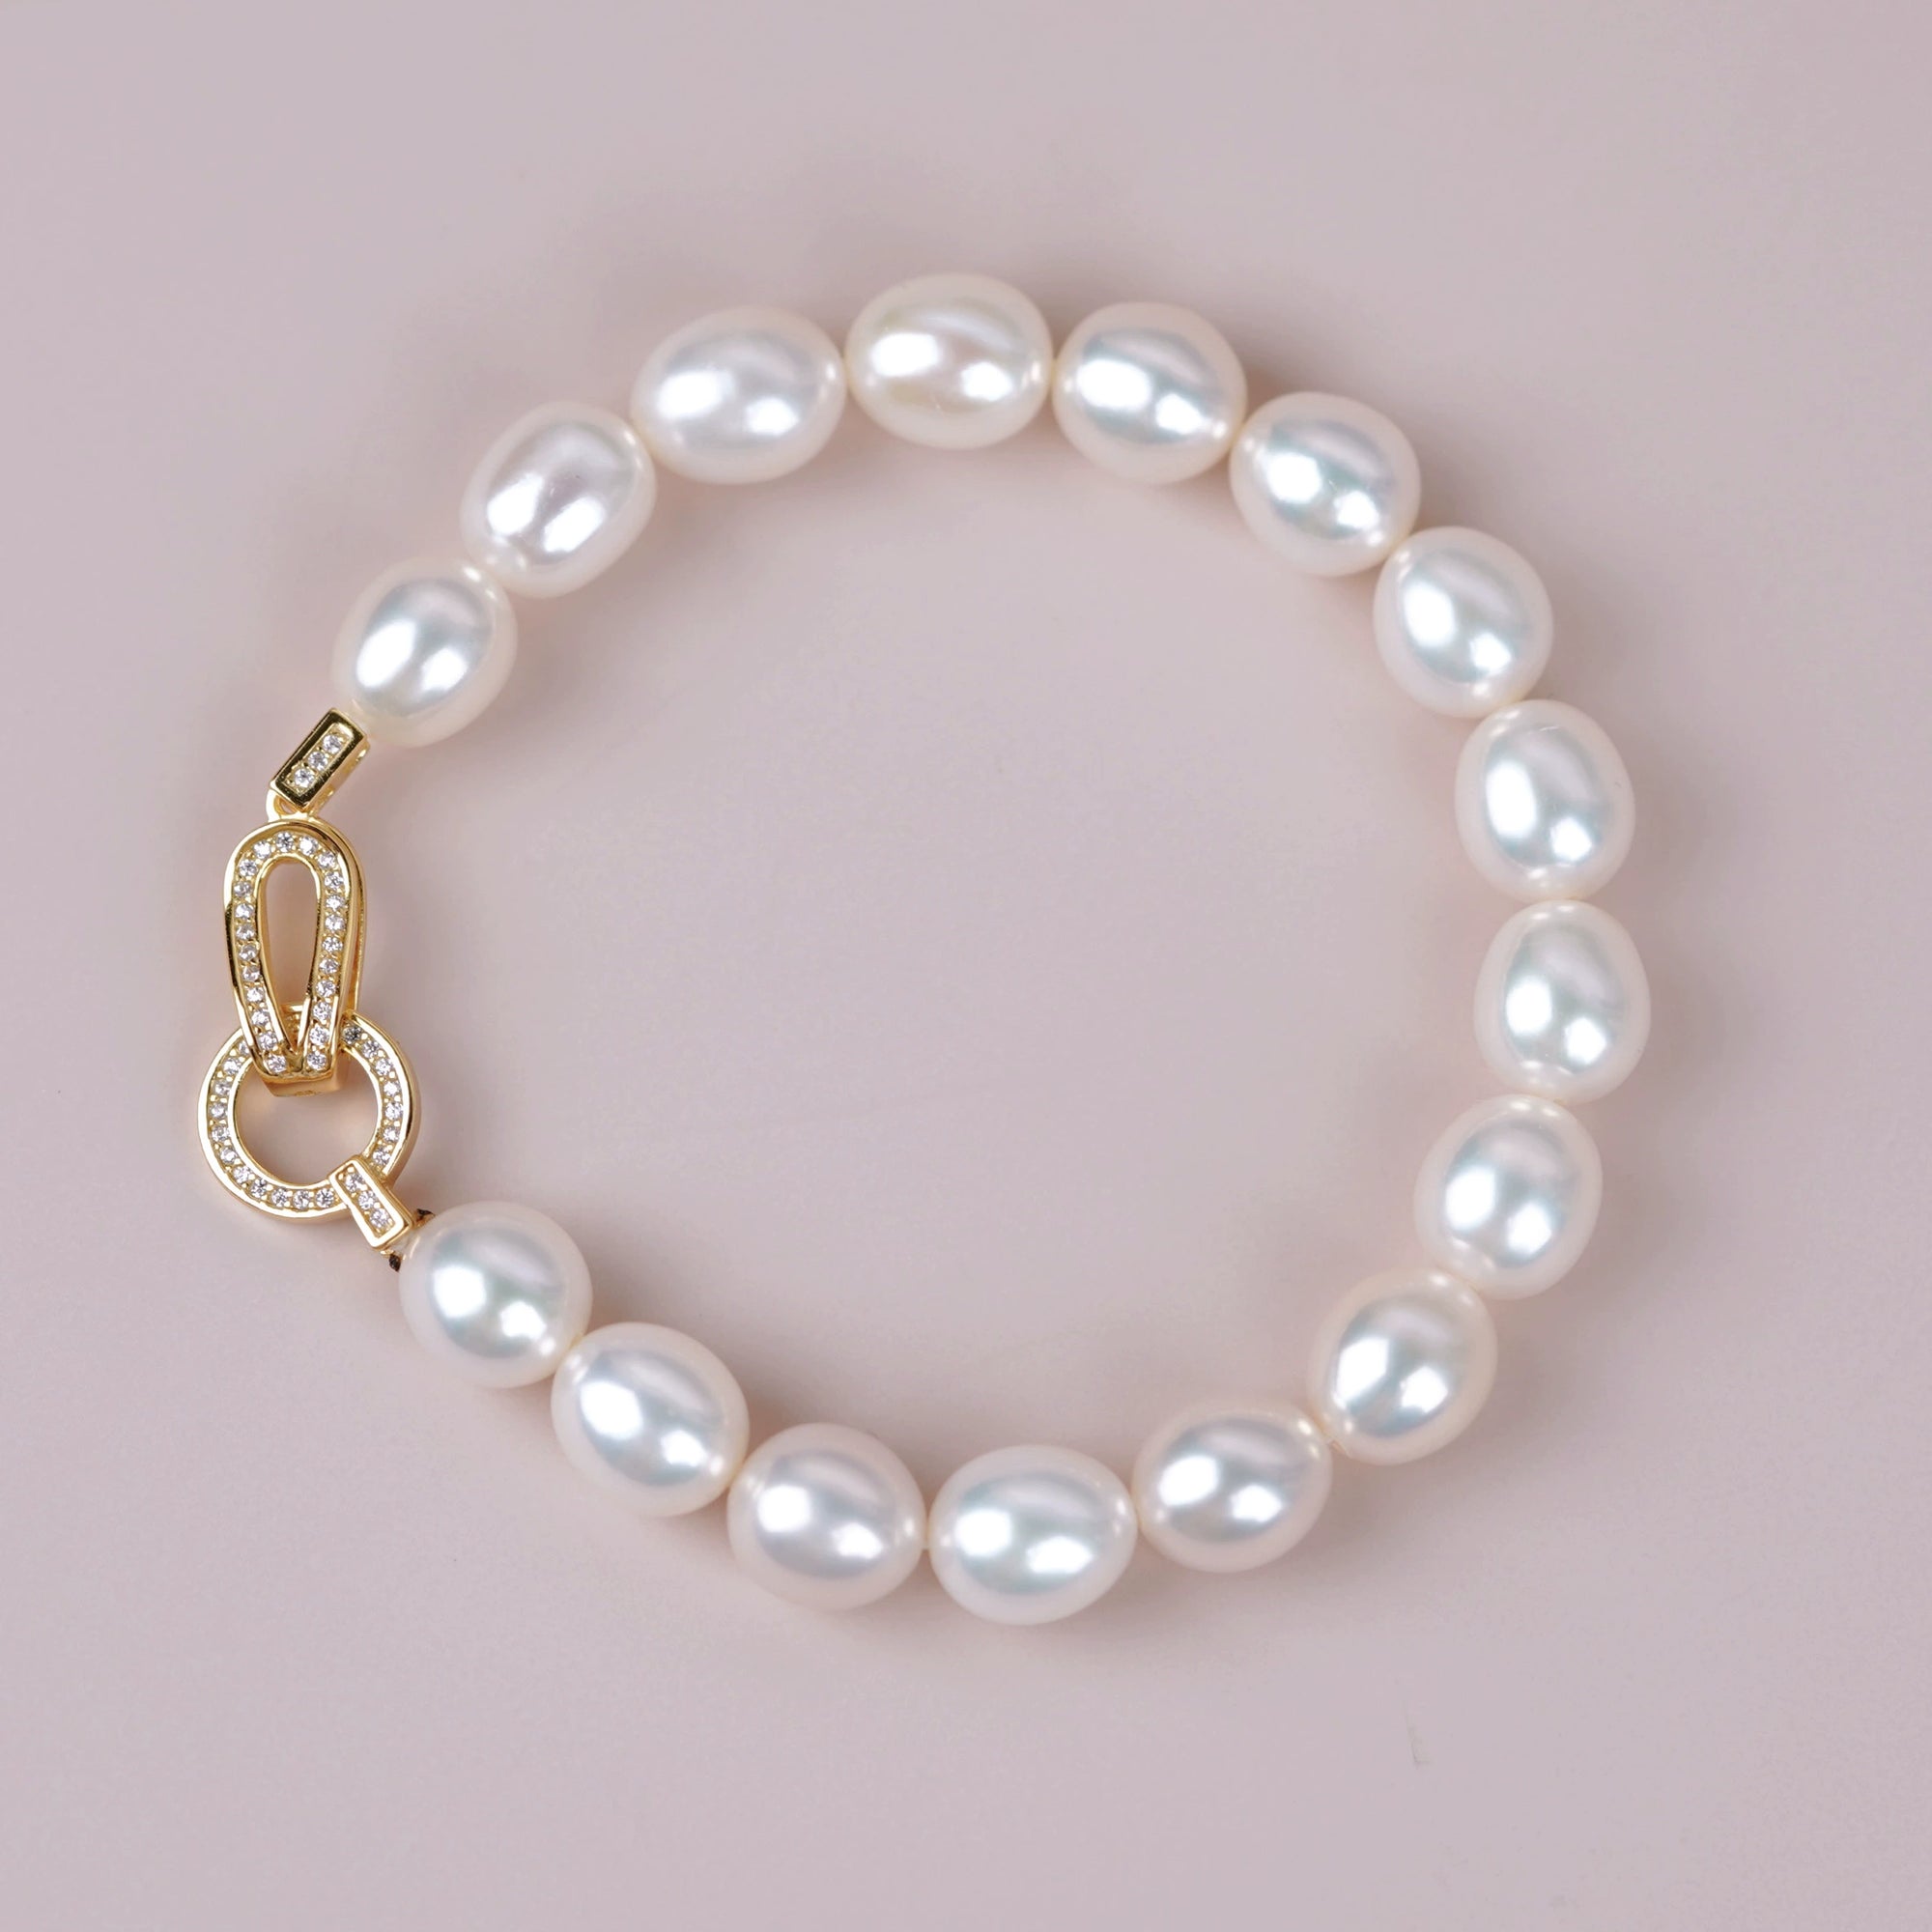 S925 sterling silver buckle clasp for pearl necklace and bracelet